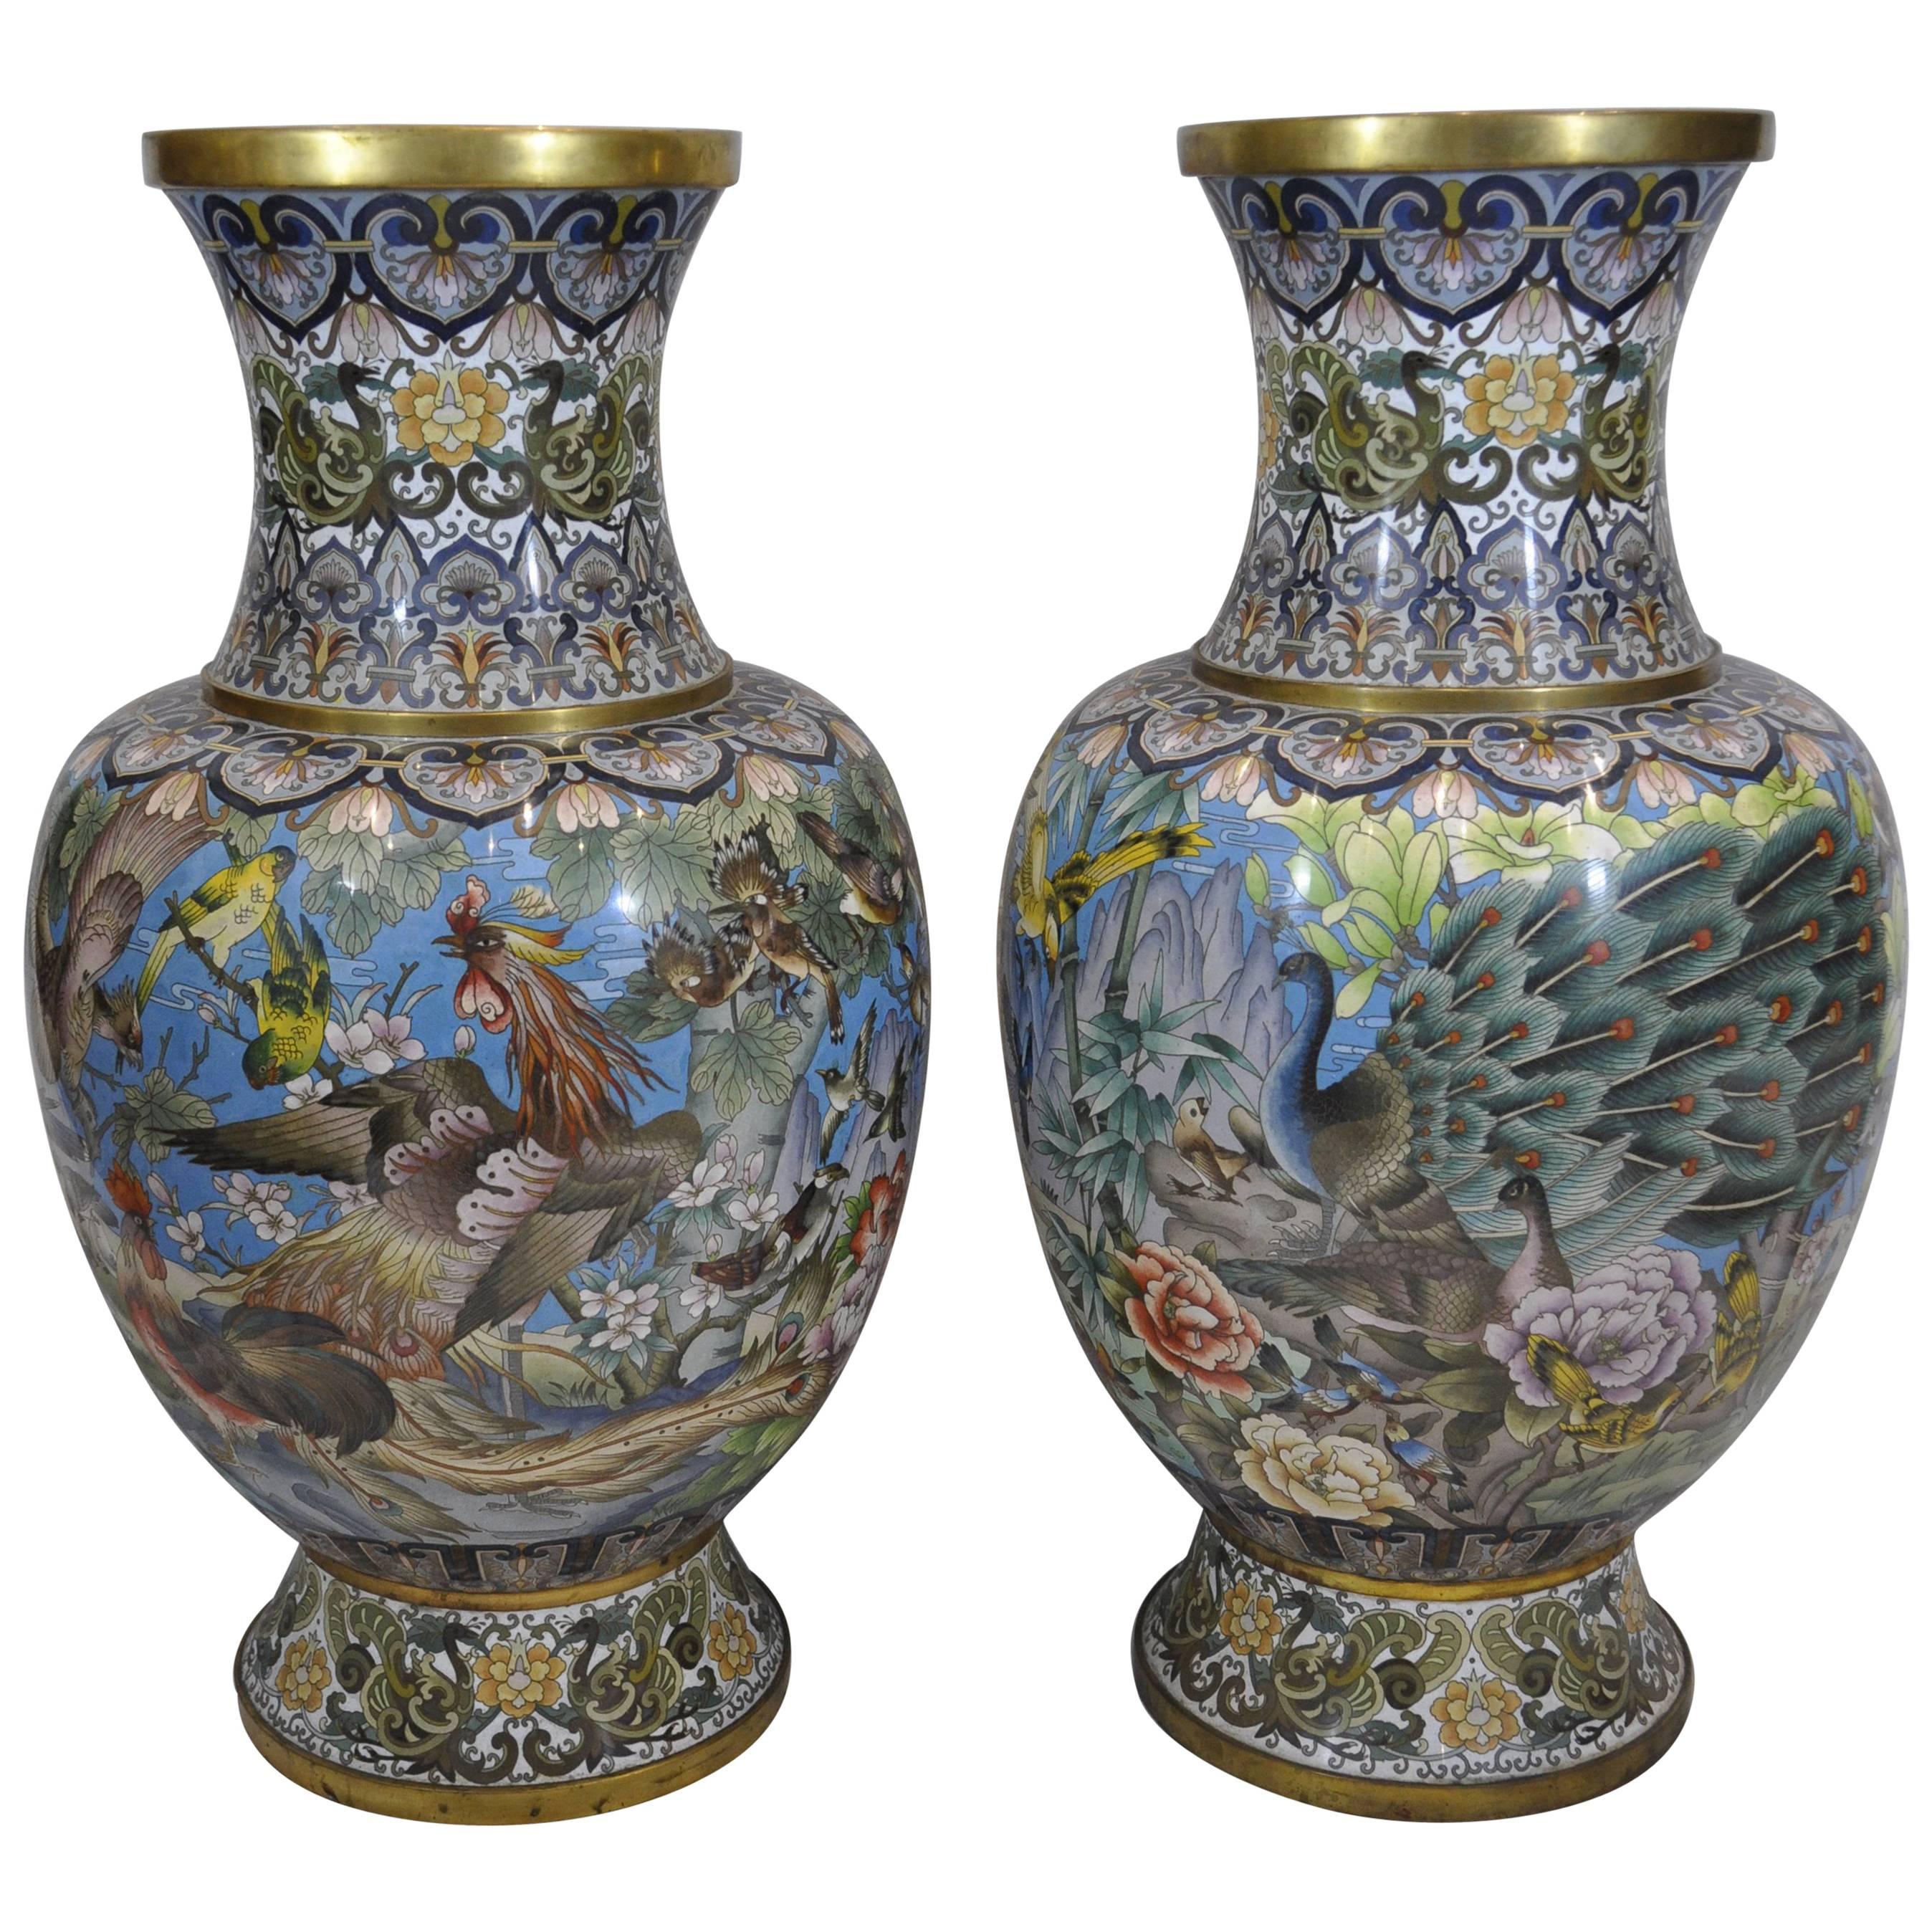 Pair of Early 20th Century Chinese Ormolu-Mounted Polychrome Cloisonné Vases For Sale